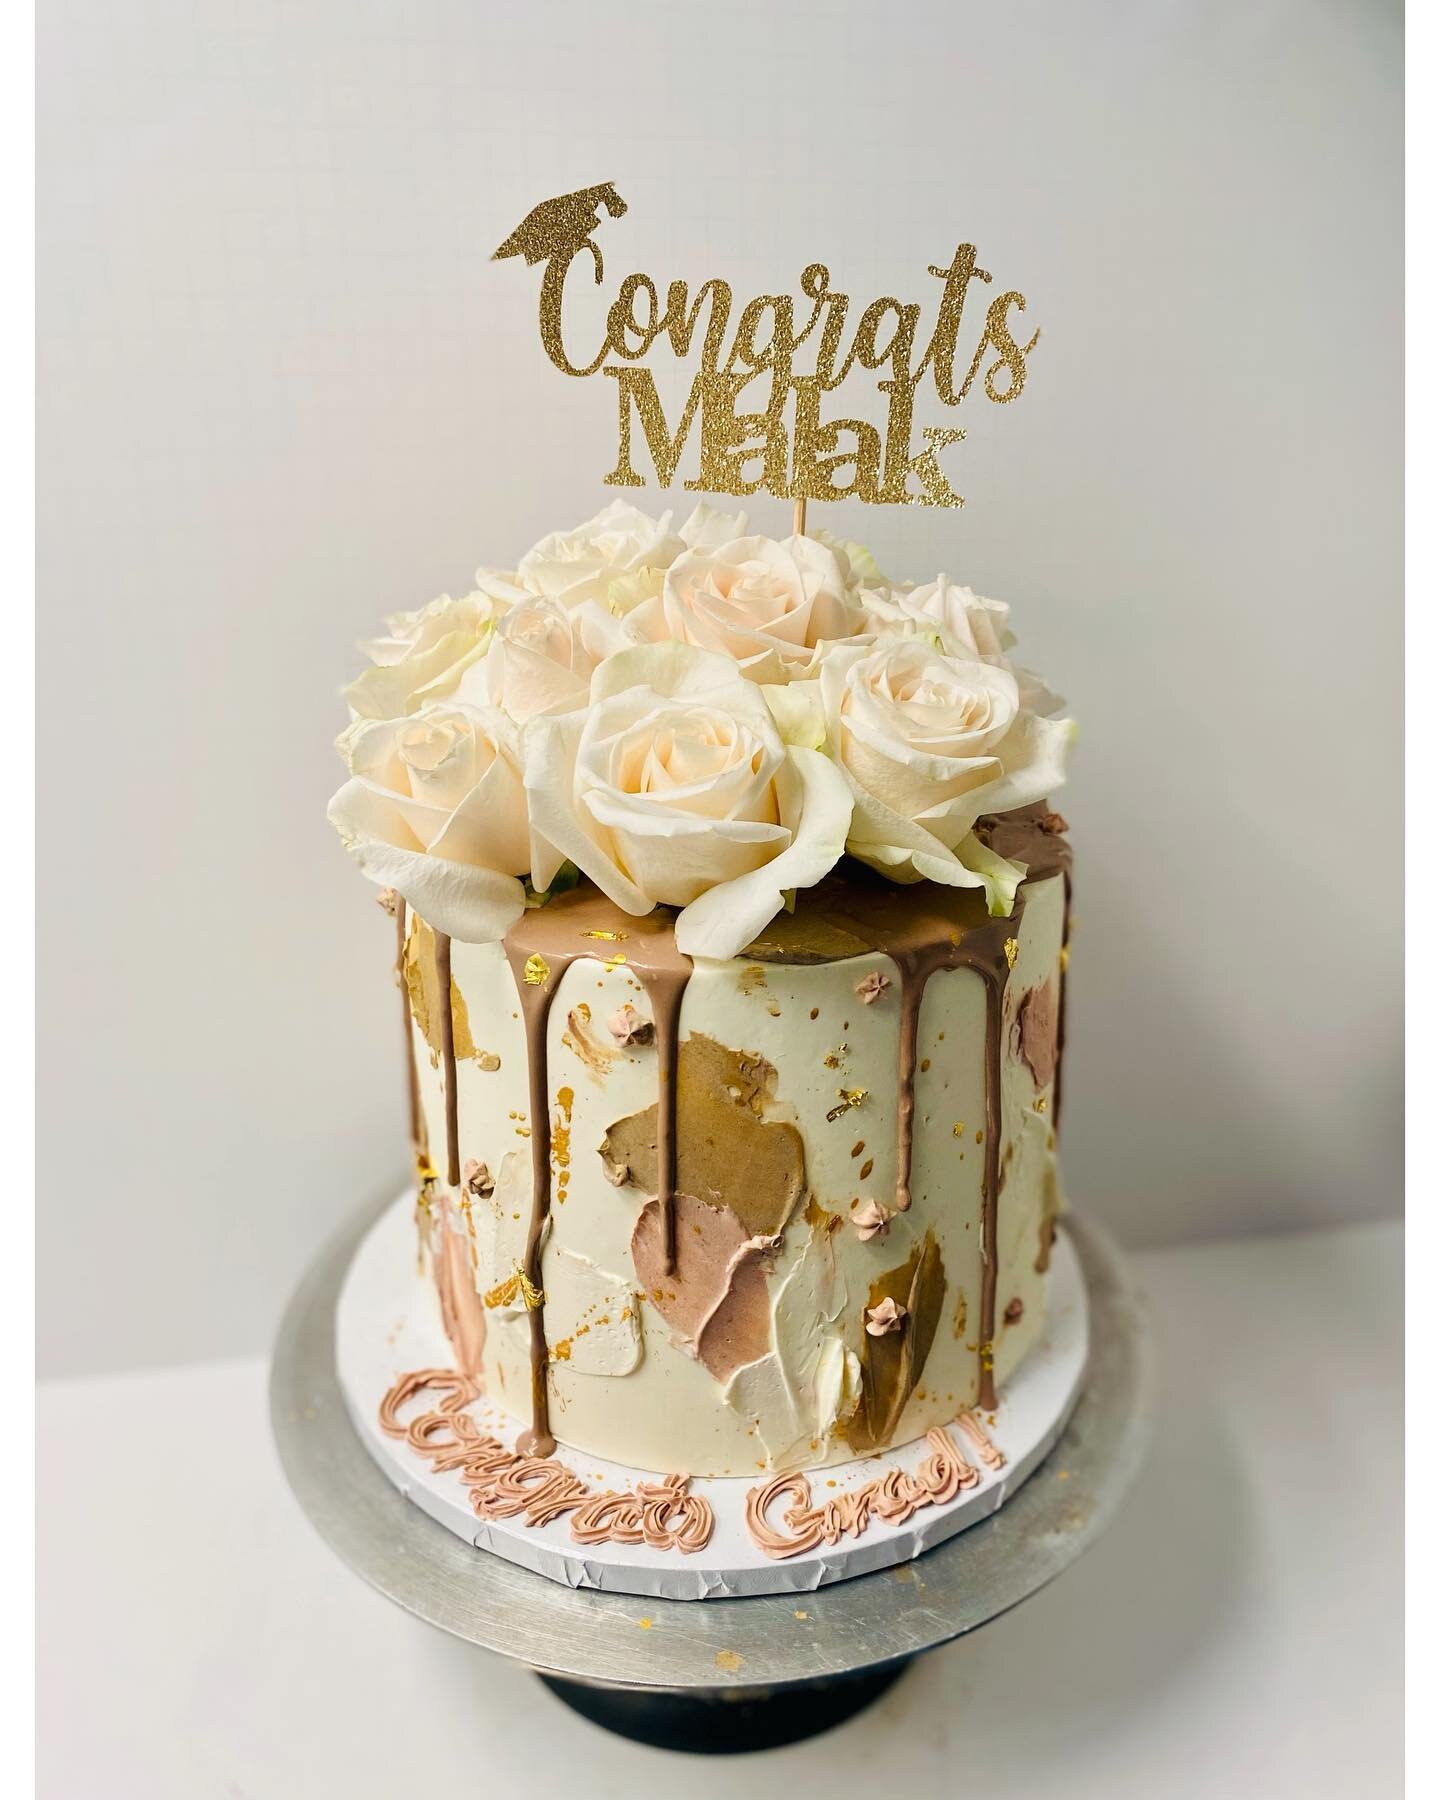 I love the neutral tones in this graduation cake 🤍🤎 so simple with just the right amount of pop to catch your eye ✨ 
.
.
.
.
.
.
.
.
#graduationcakes #graduation2021 #neutralcake #dripcake #cakesofinstagram #cakestagram #cakedecorating #supportsmal